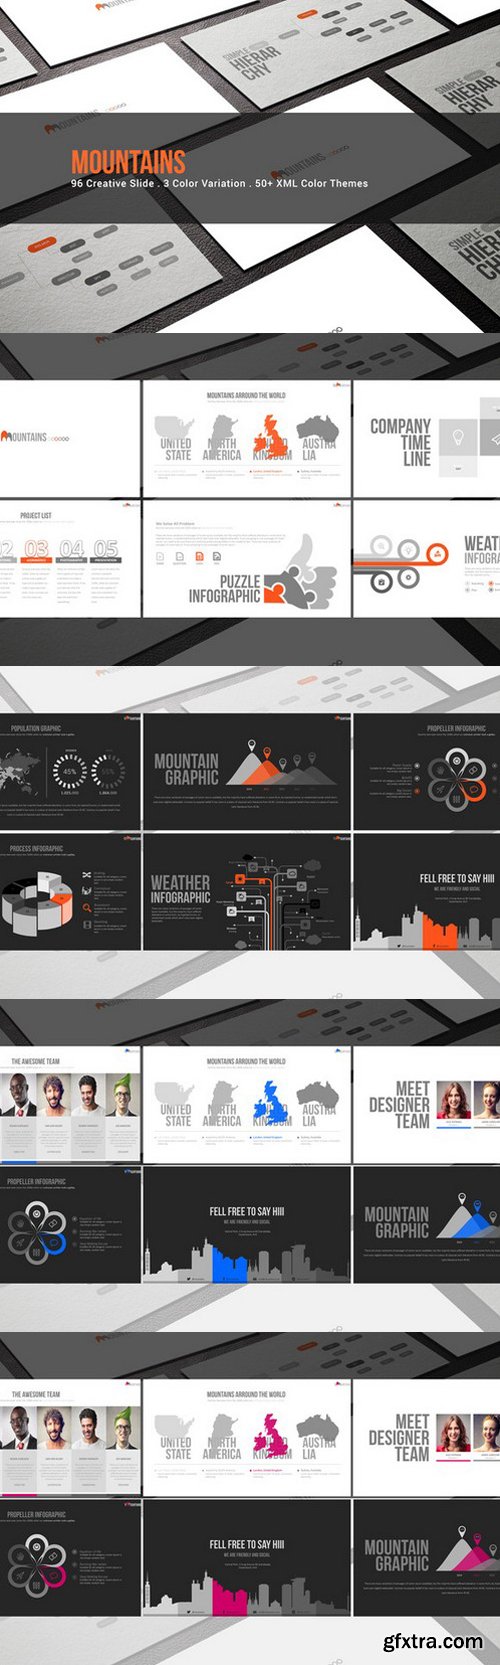 CM - Mountains Powerpoint Template 771652